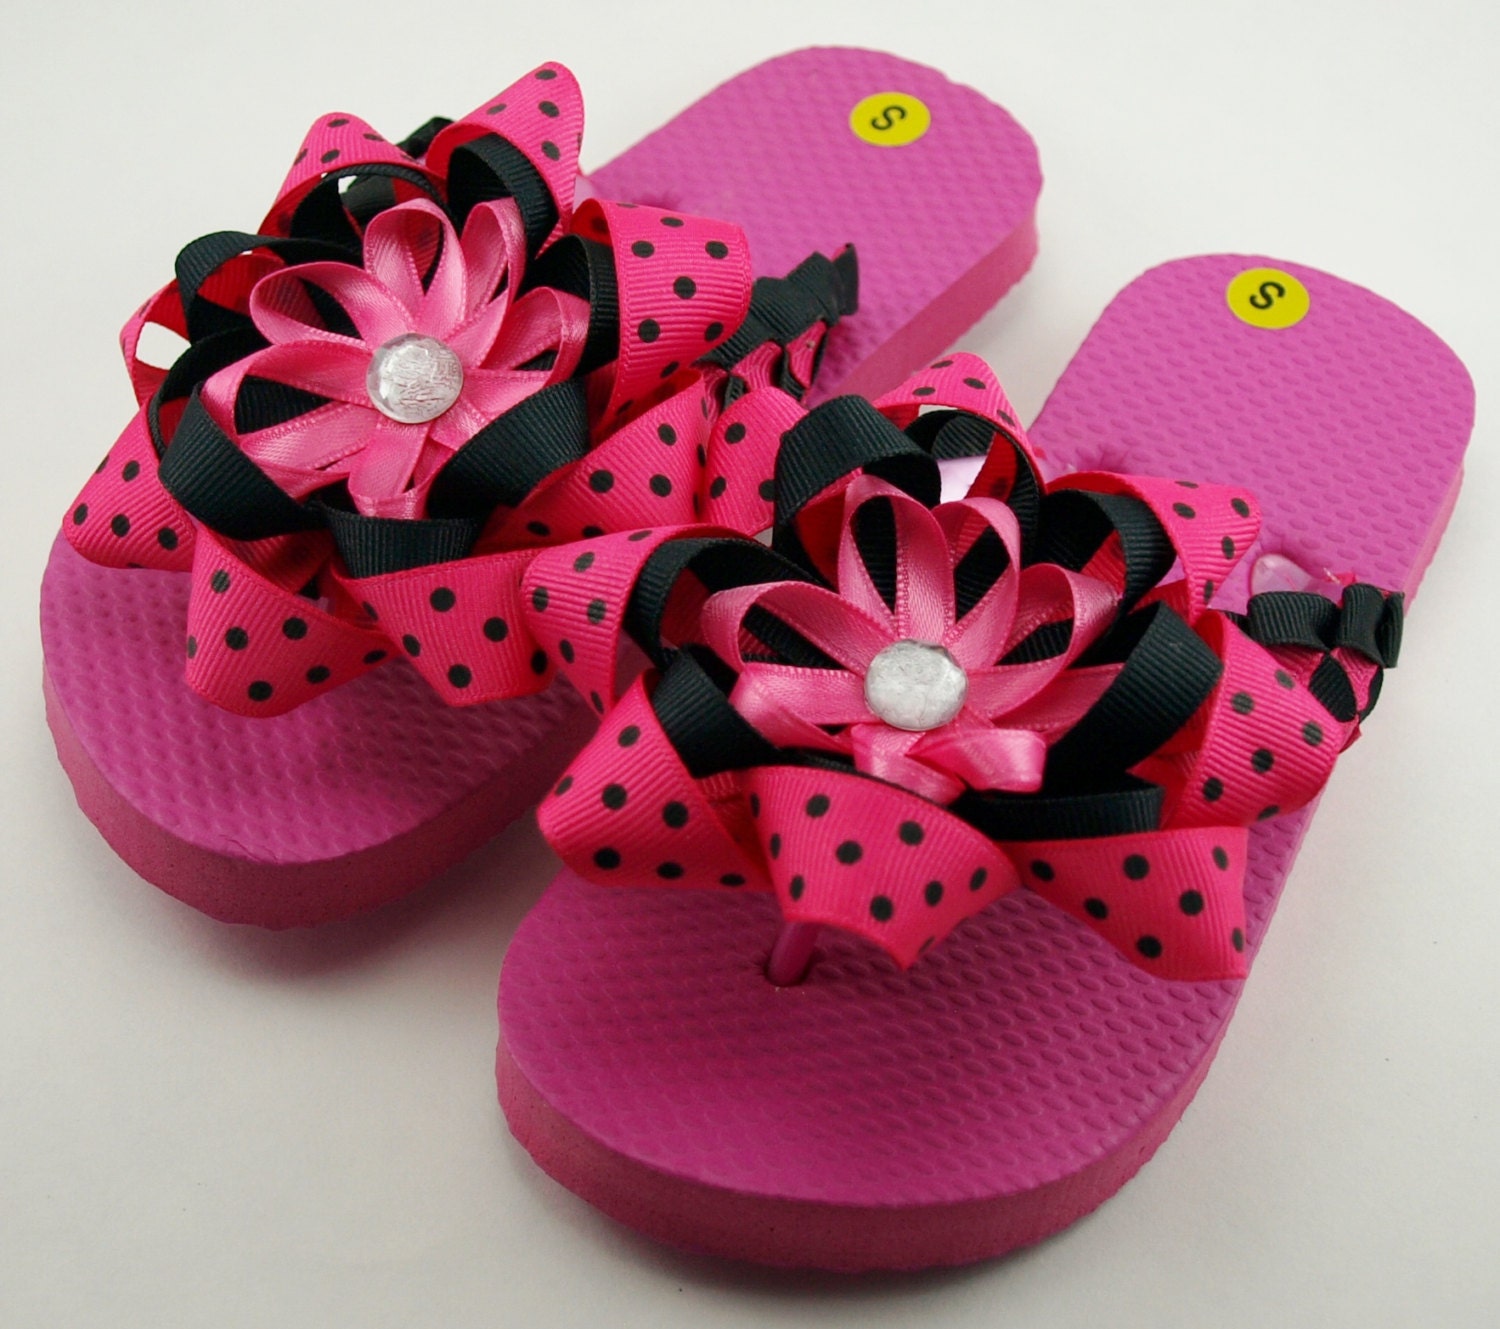 Hot Pink and Black Girls Flip Flops Child S by TheSidelineBoutique